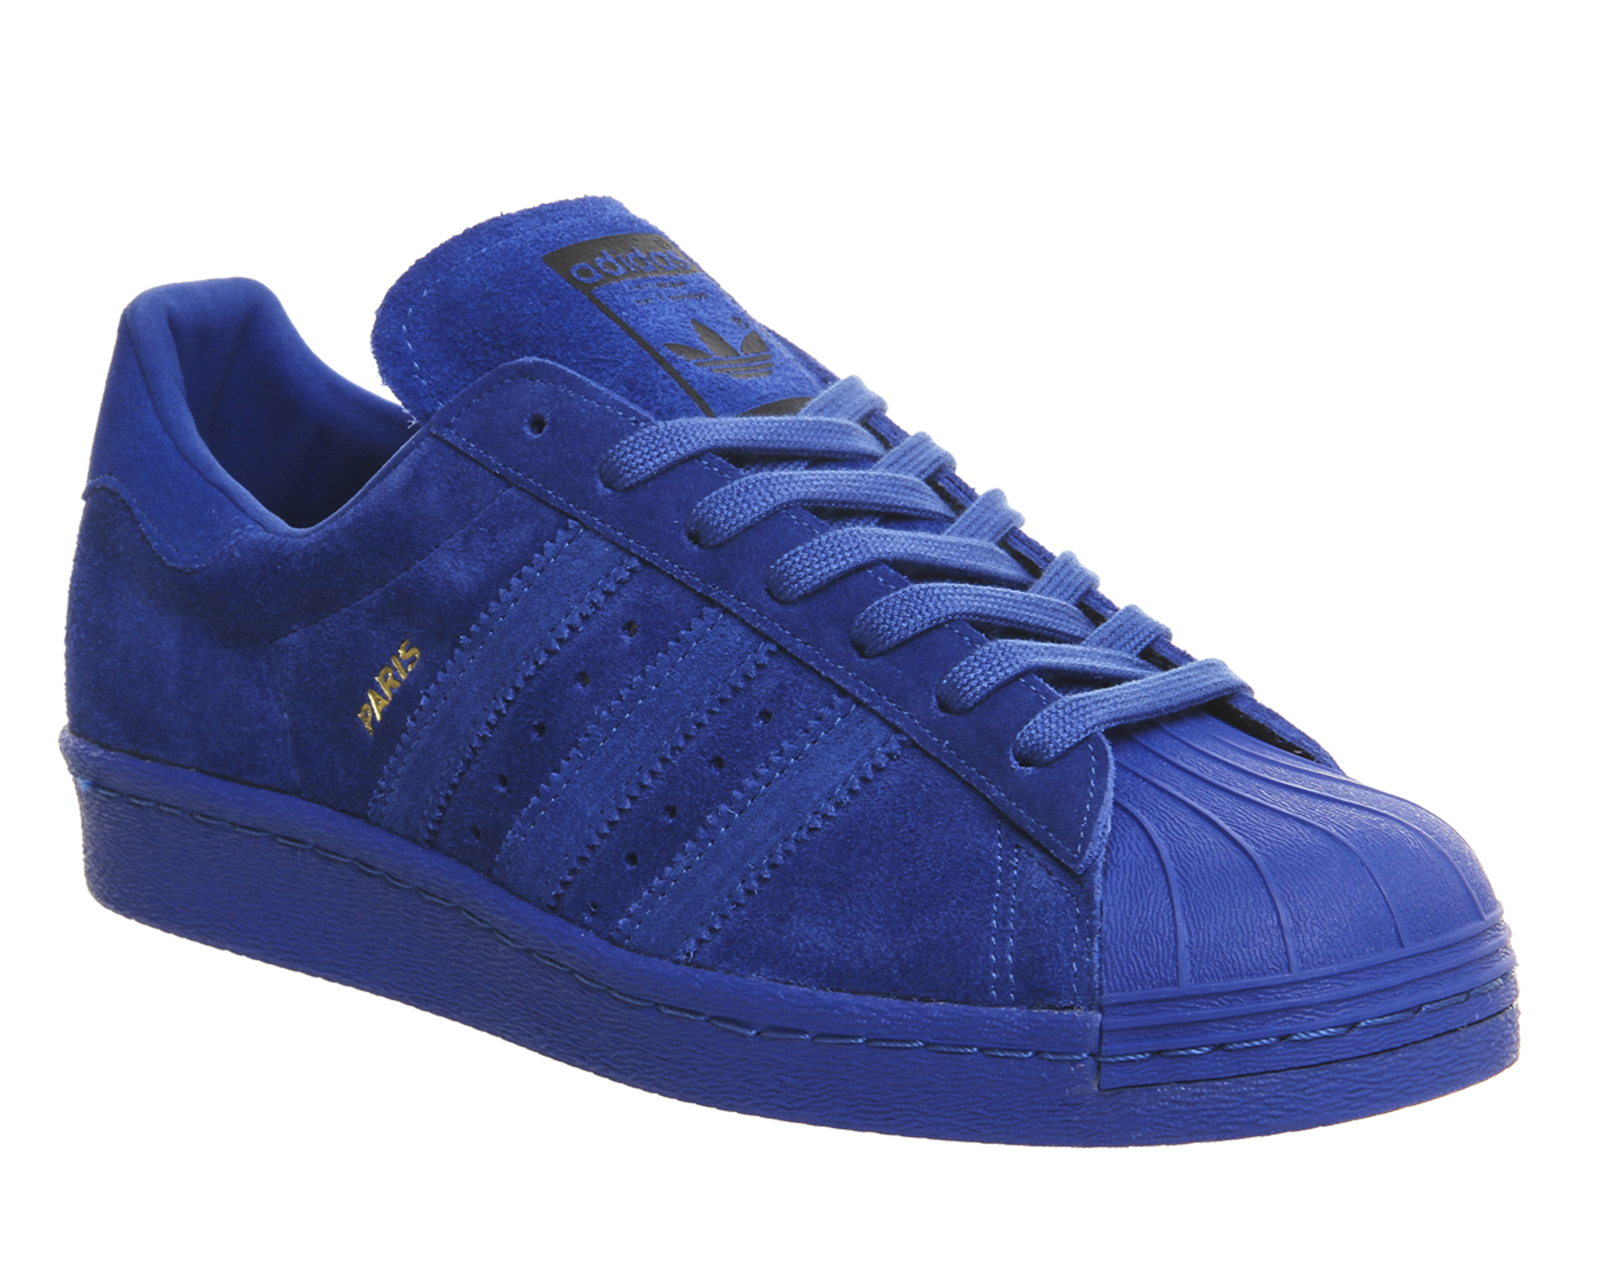 suede shell toe adidas